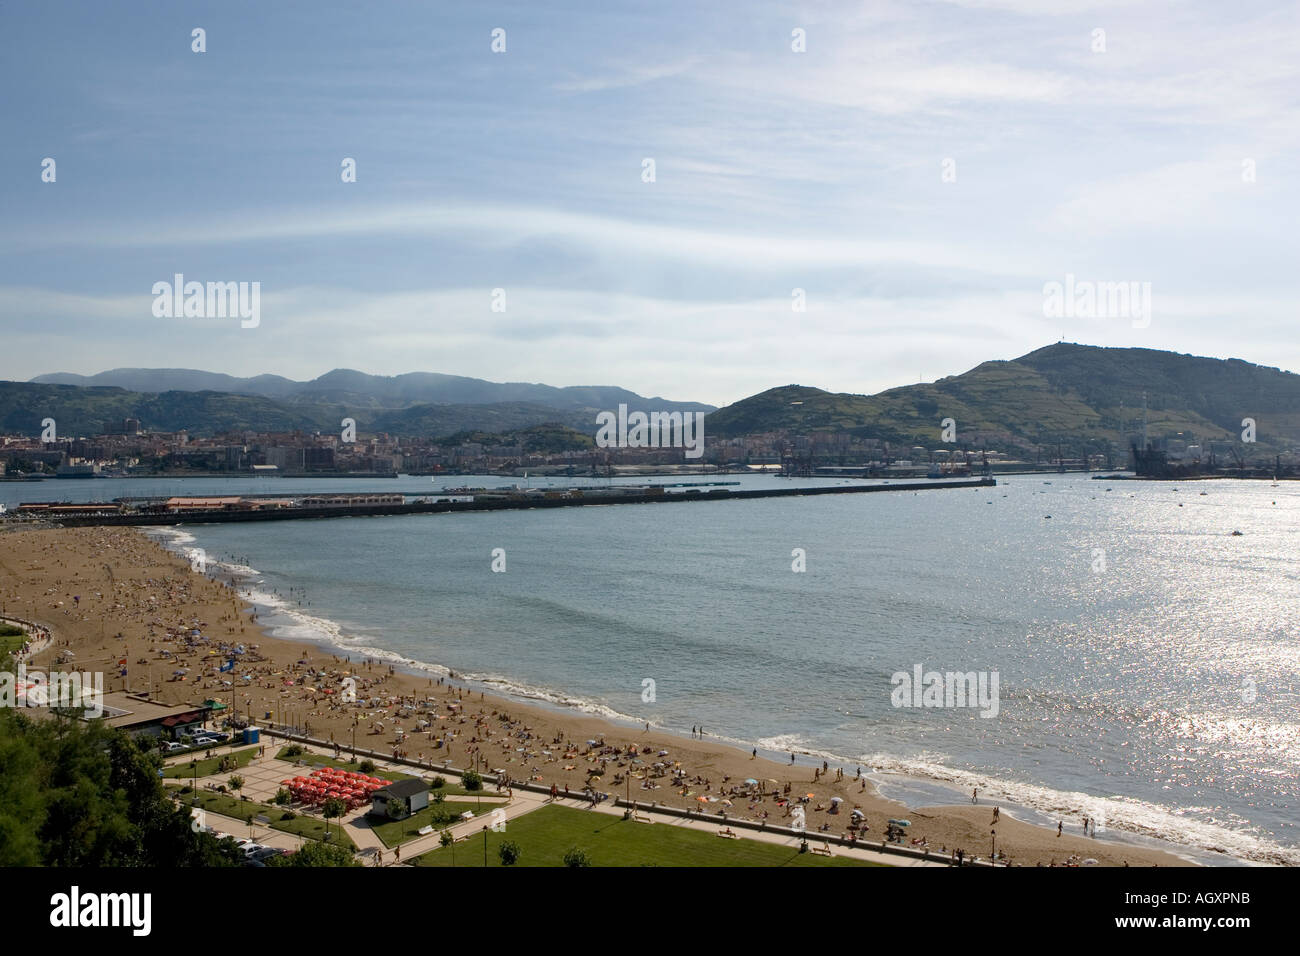 View over bay from Algorta looking towards Portugalete Basque Country Spain Stock Photo